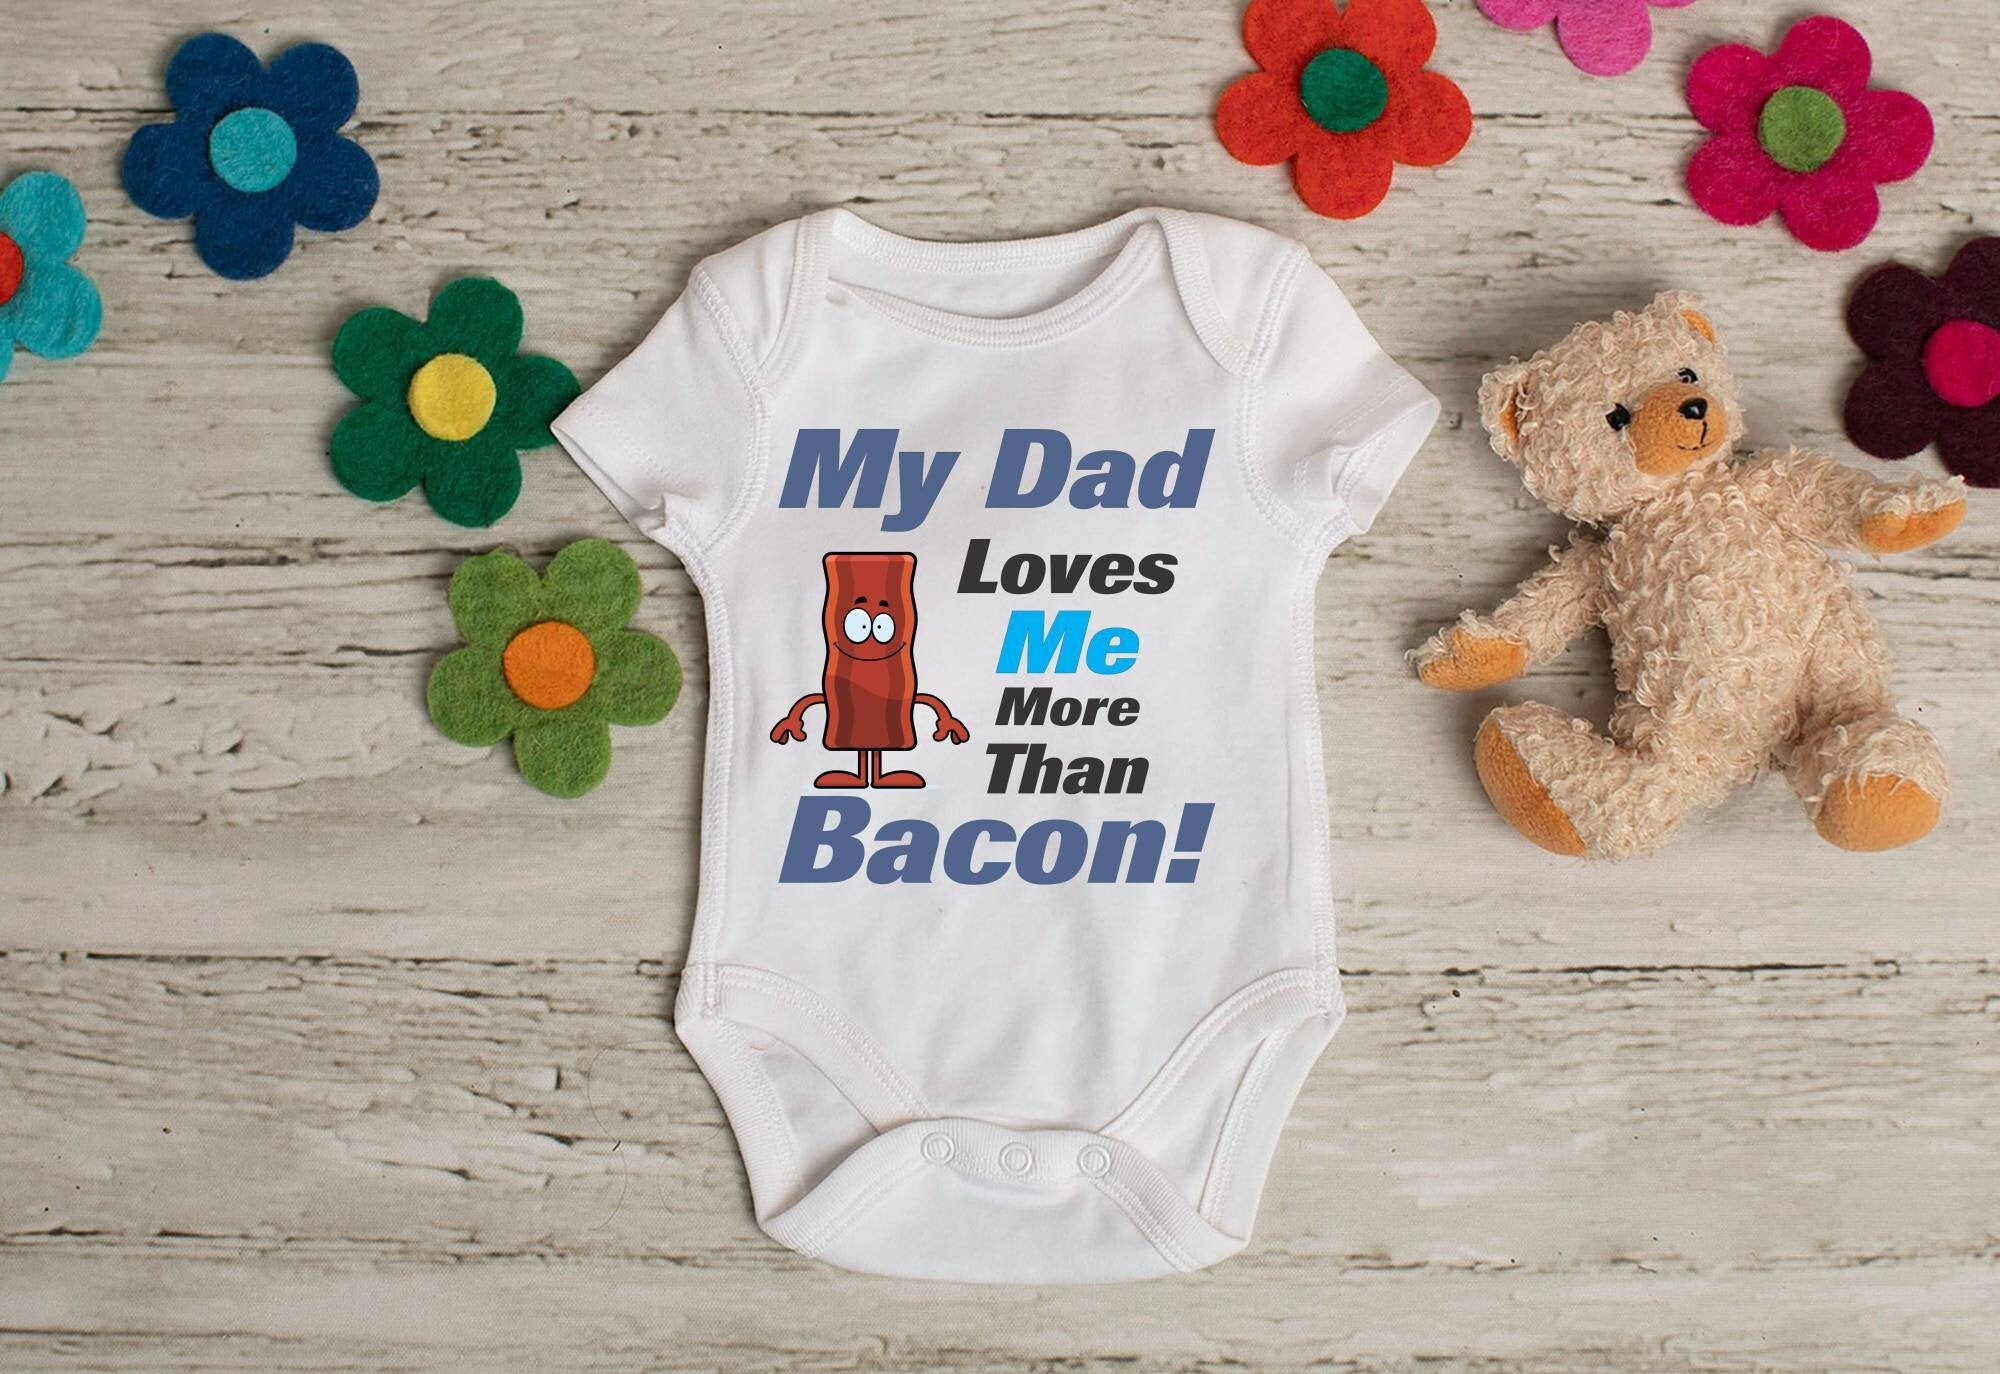 My Dad Loves Bacon More Than Your Dad Toddler Baby Kid T-shirt Tee 6mo Thru 7t